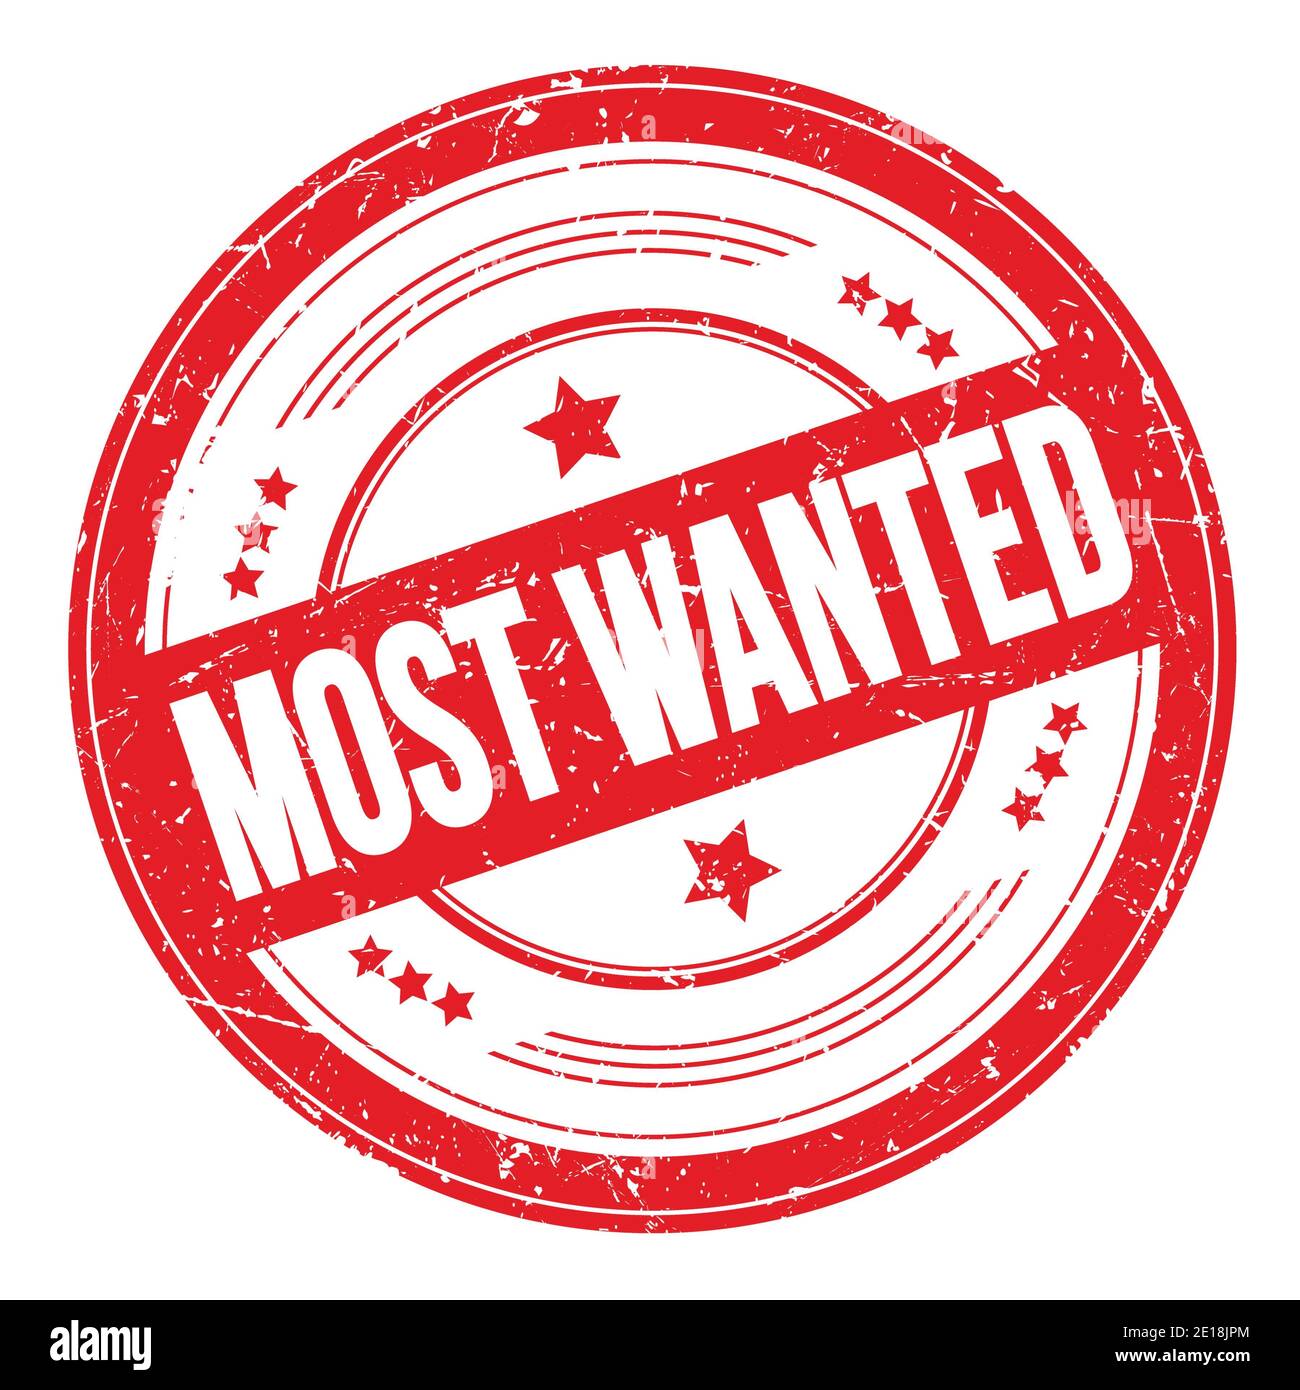 MOST WANTED text on red round grungy texture stamp. Stock Photo